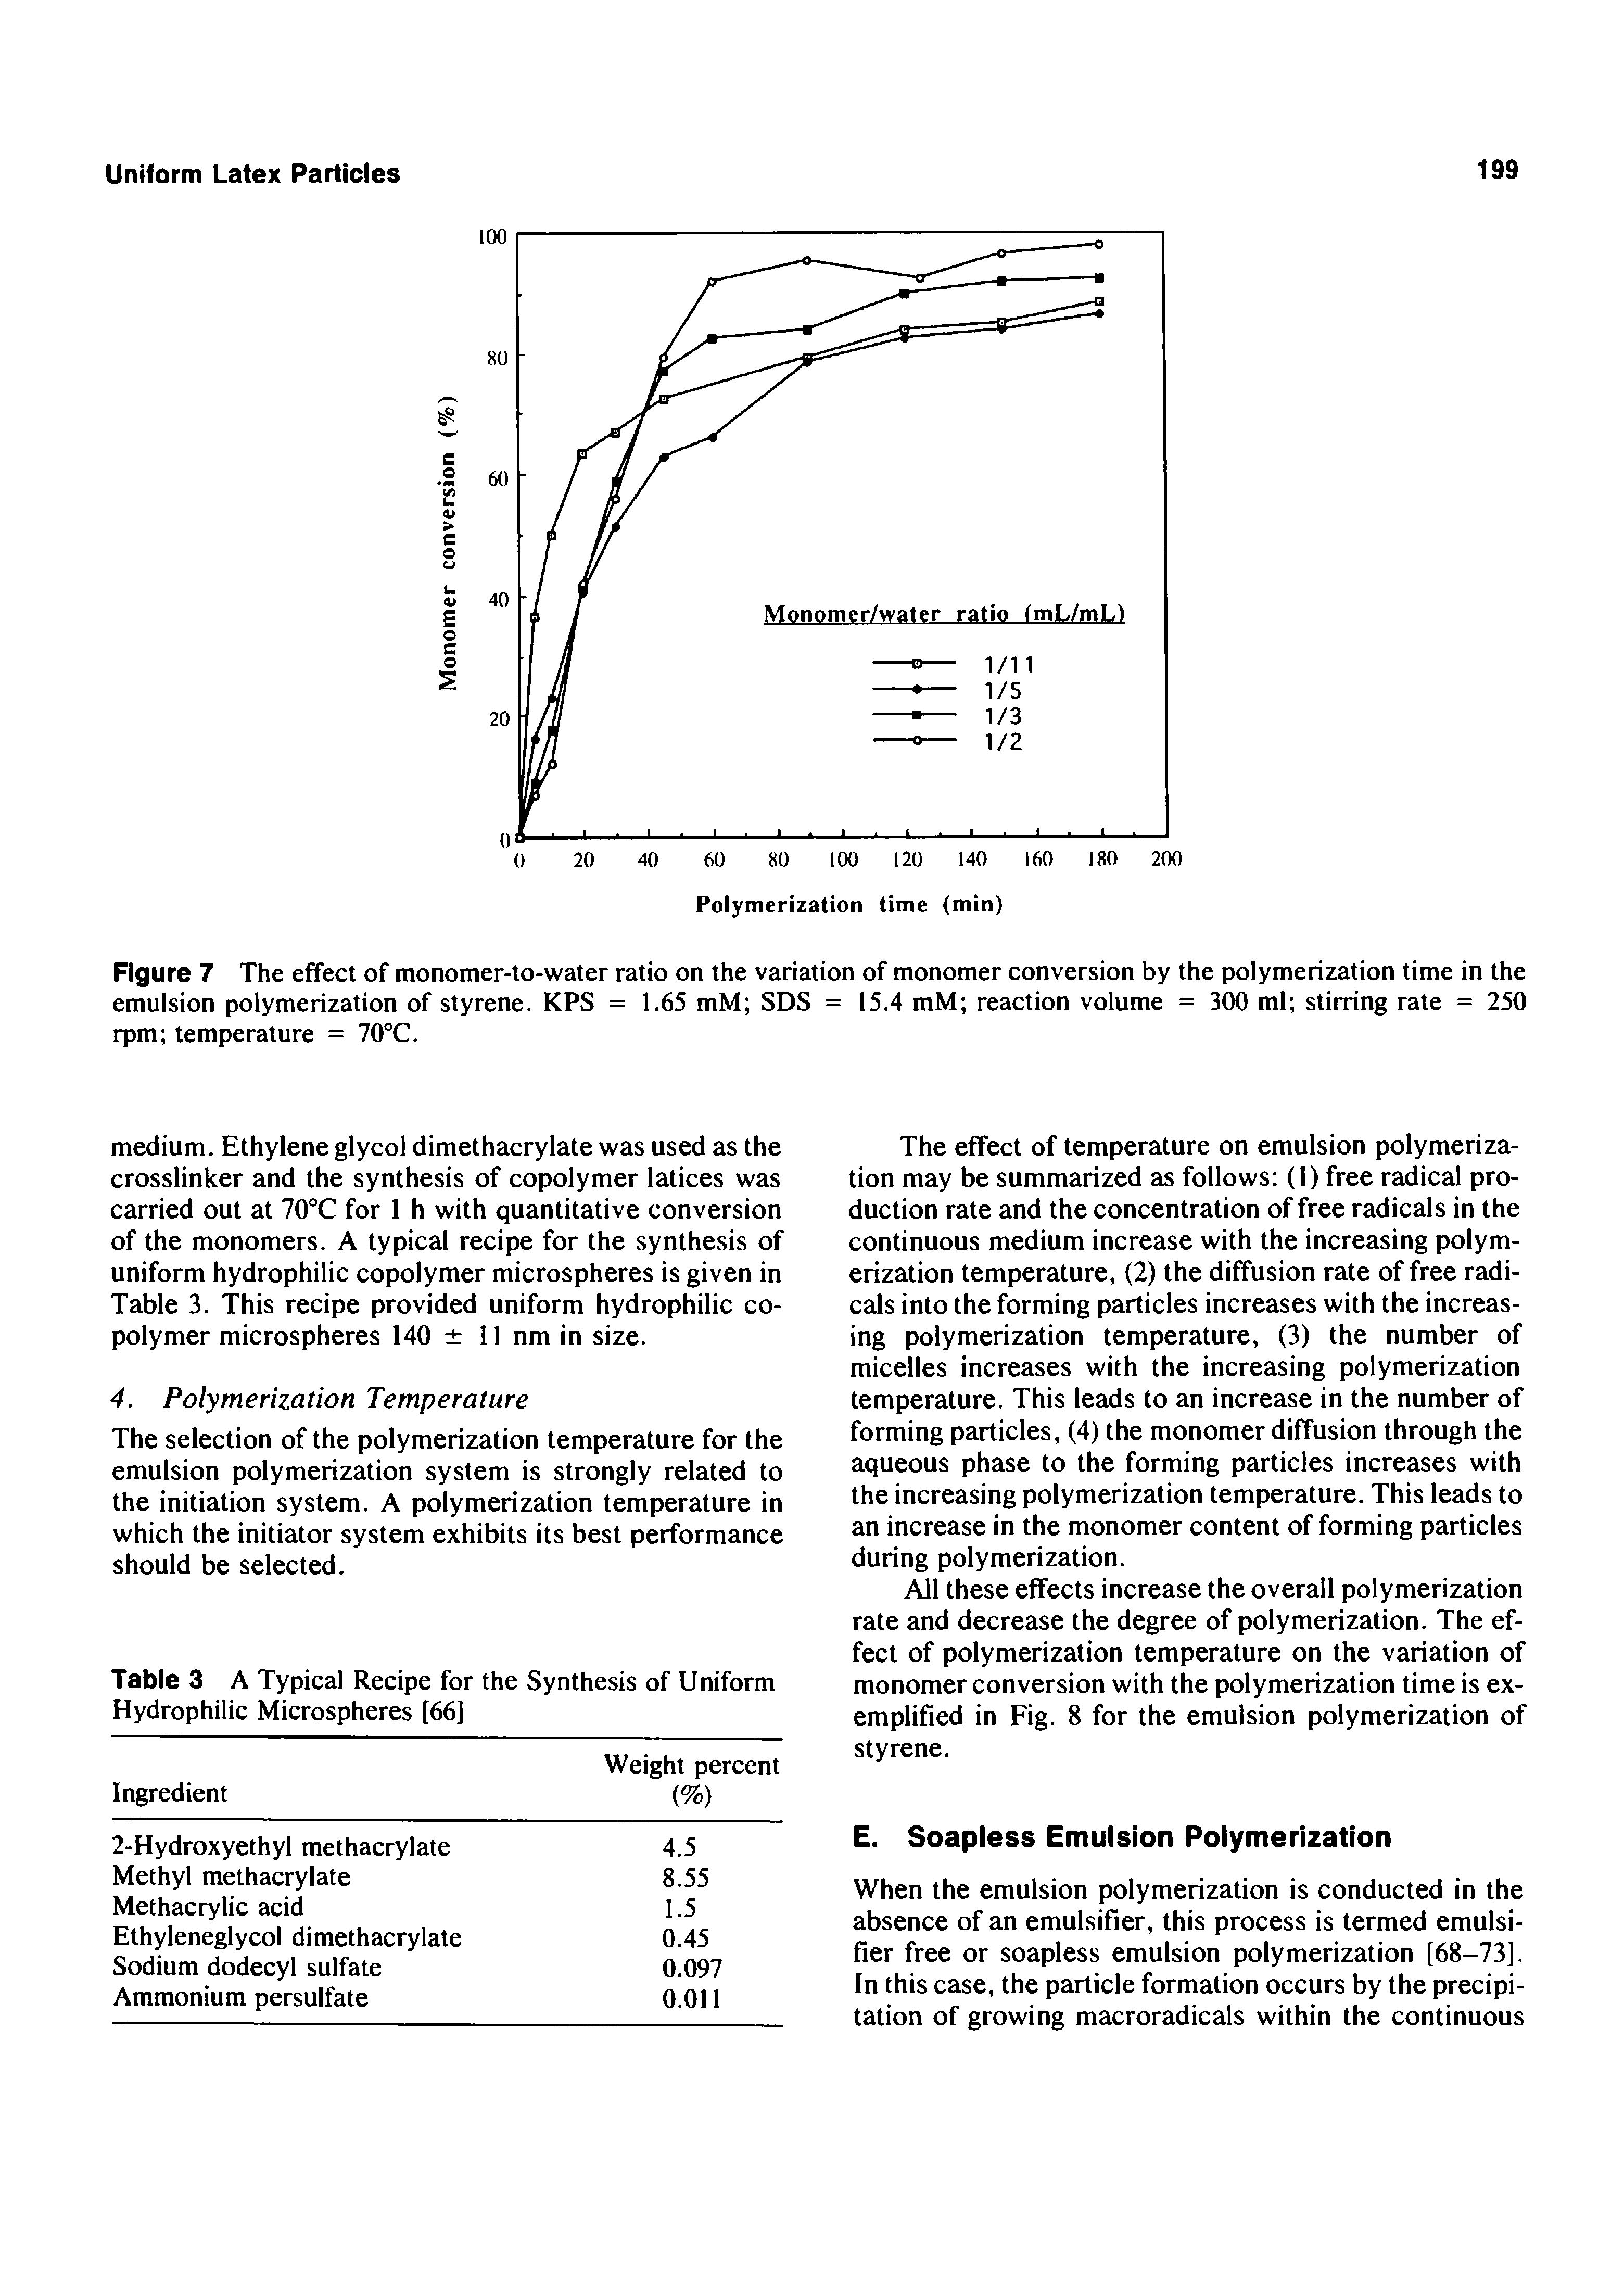 Figure 7 The effect of monomer-to-water ratio on the variation of monomer conversion by the polymerization time in the emulsion polymerization of styrene. KPS = 1.65 mM SDS = 15.4 mM reaction volume = 300 ml stirring rate = 250 rpm temperature = 70°C.